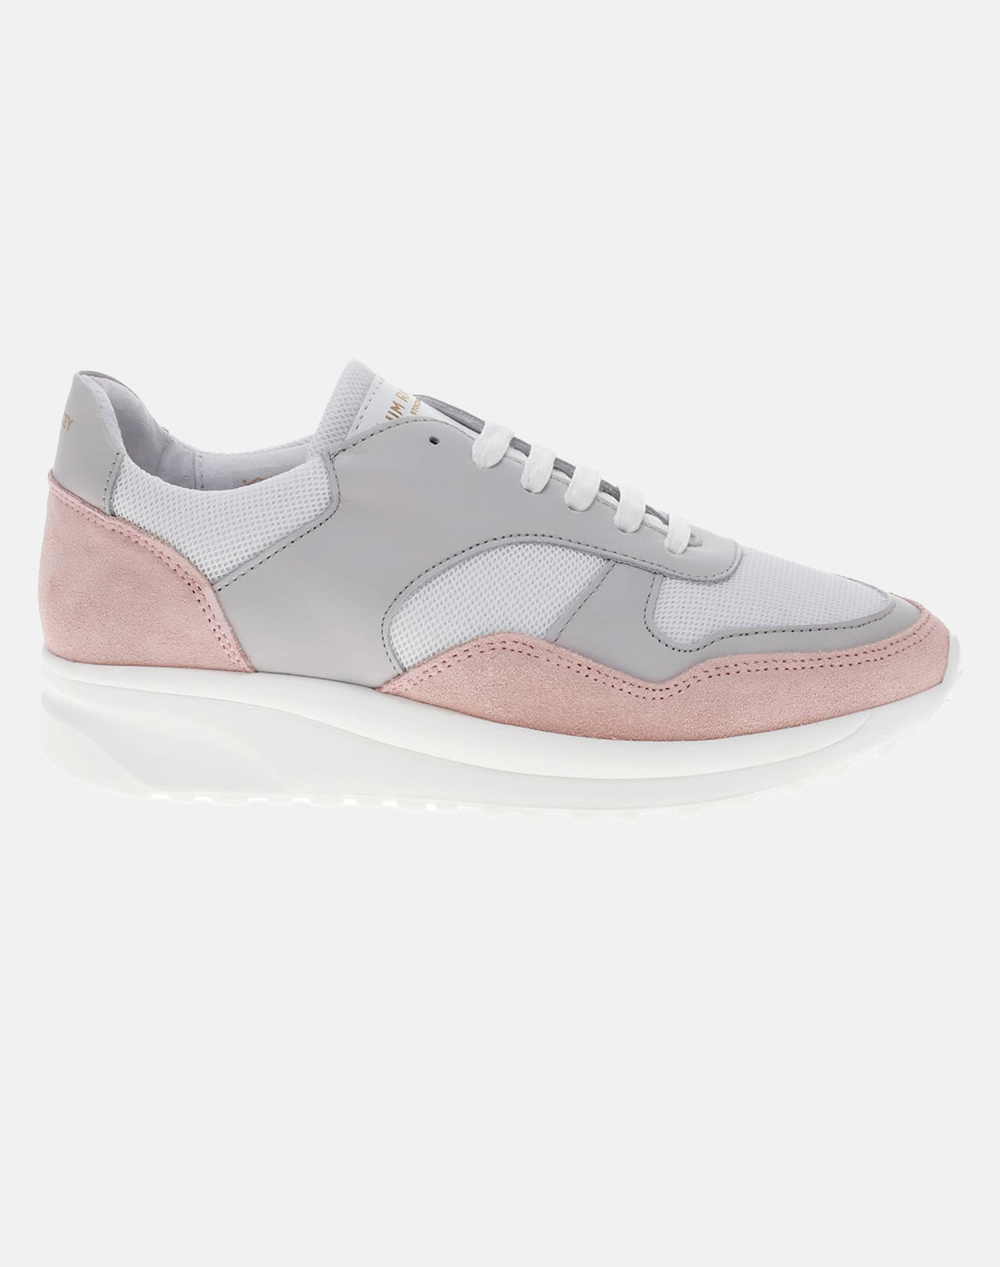 JIM RICKEY PULP – COW SUEDE ΓΥΝΑΙΚΕΙΑ SNEAKERS 20017159-Peonia Gray